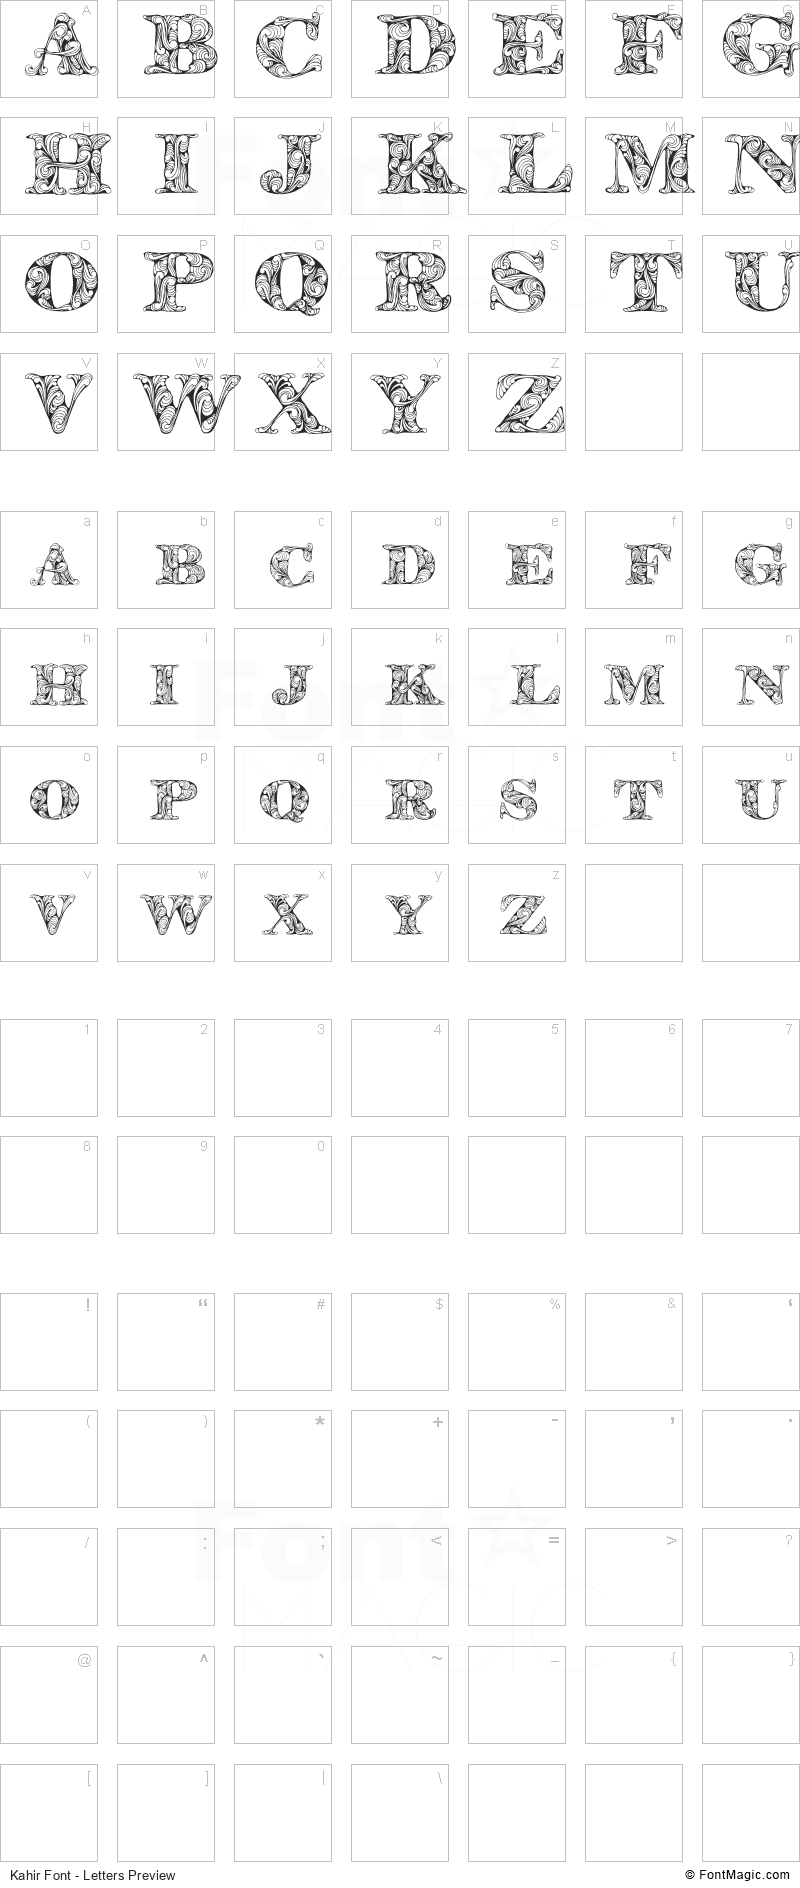 Kahir Font - All Latters Preview Chart